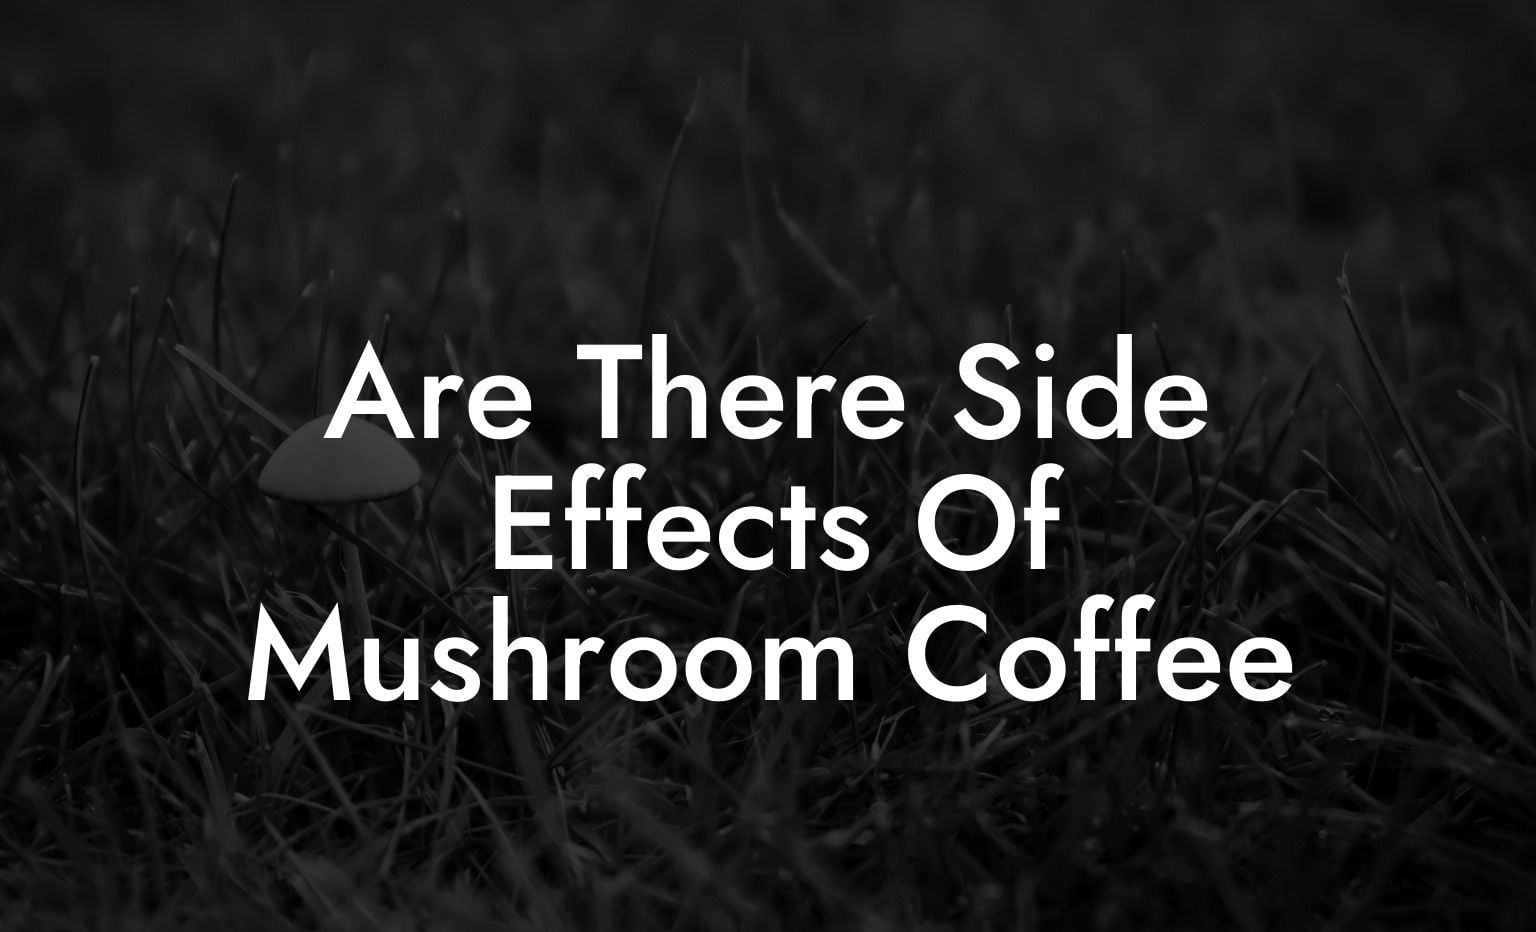 Are There Side Effects Of Mushroom Coffee